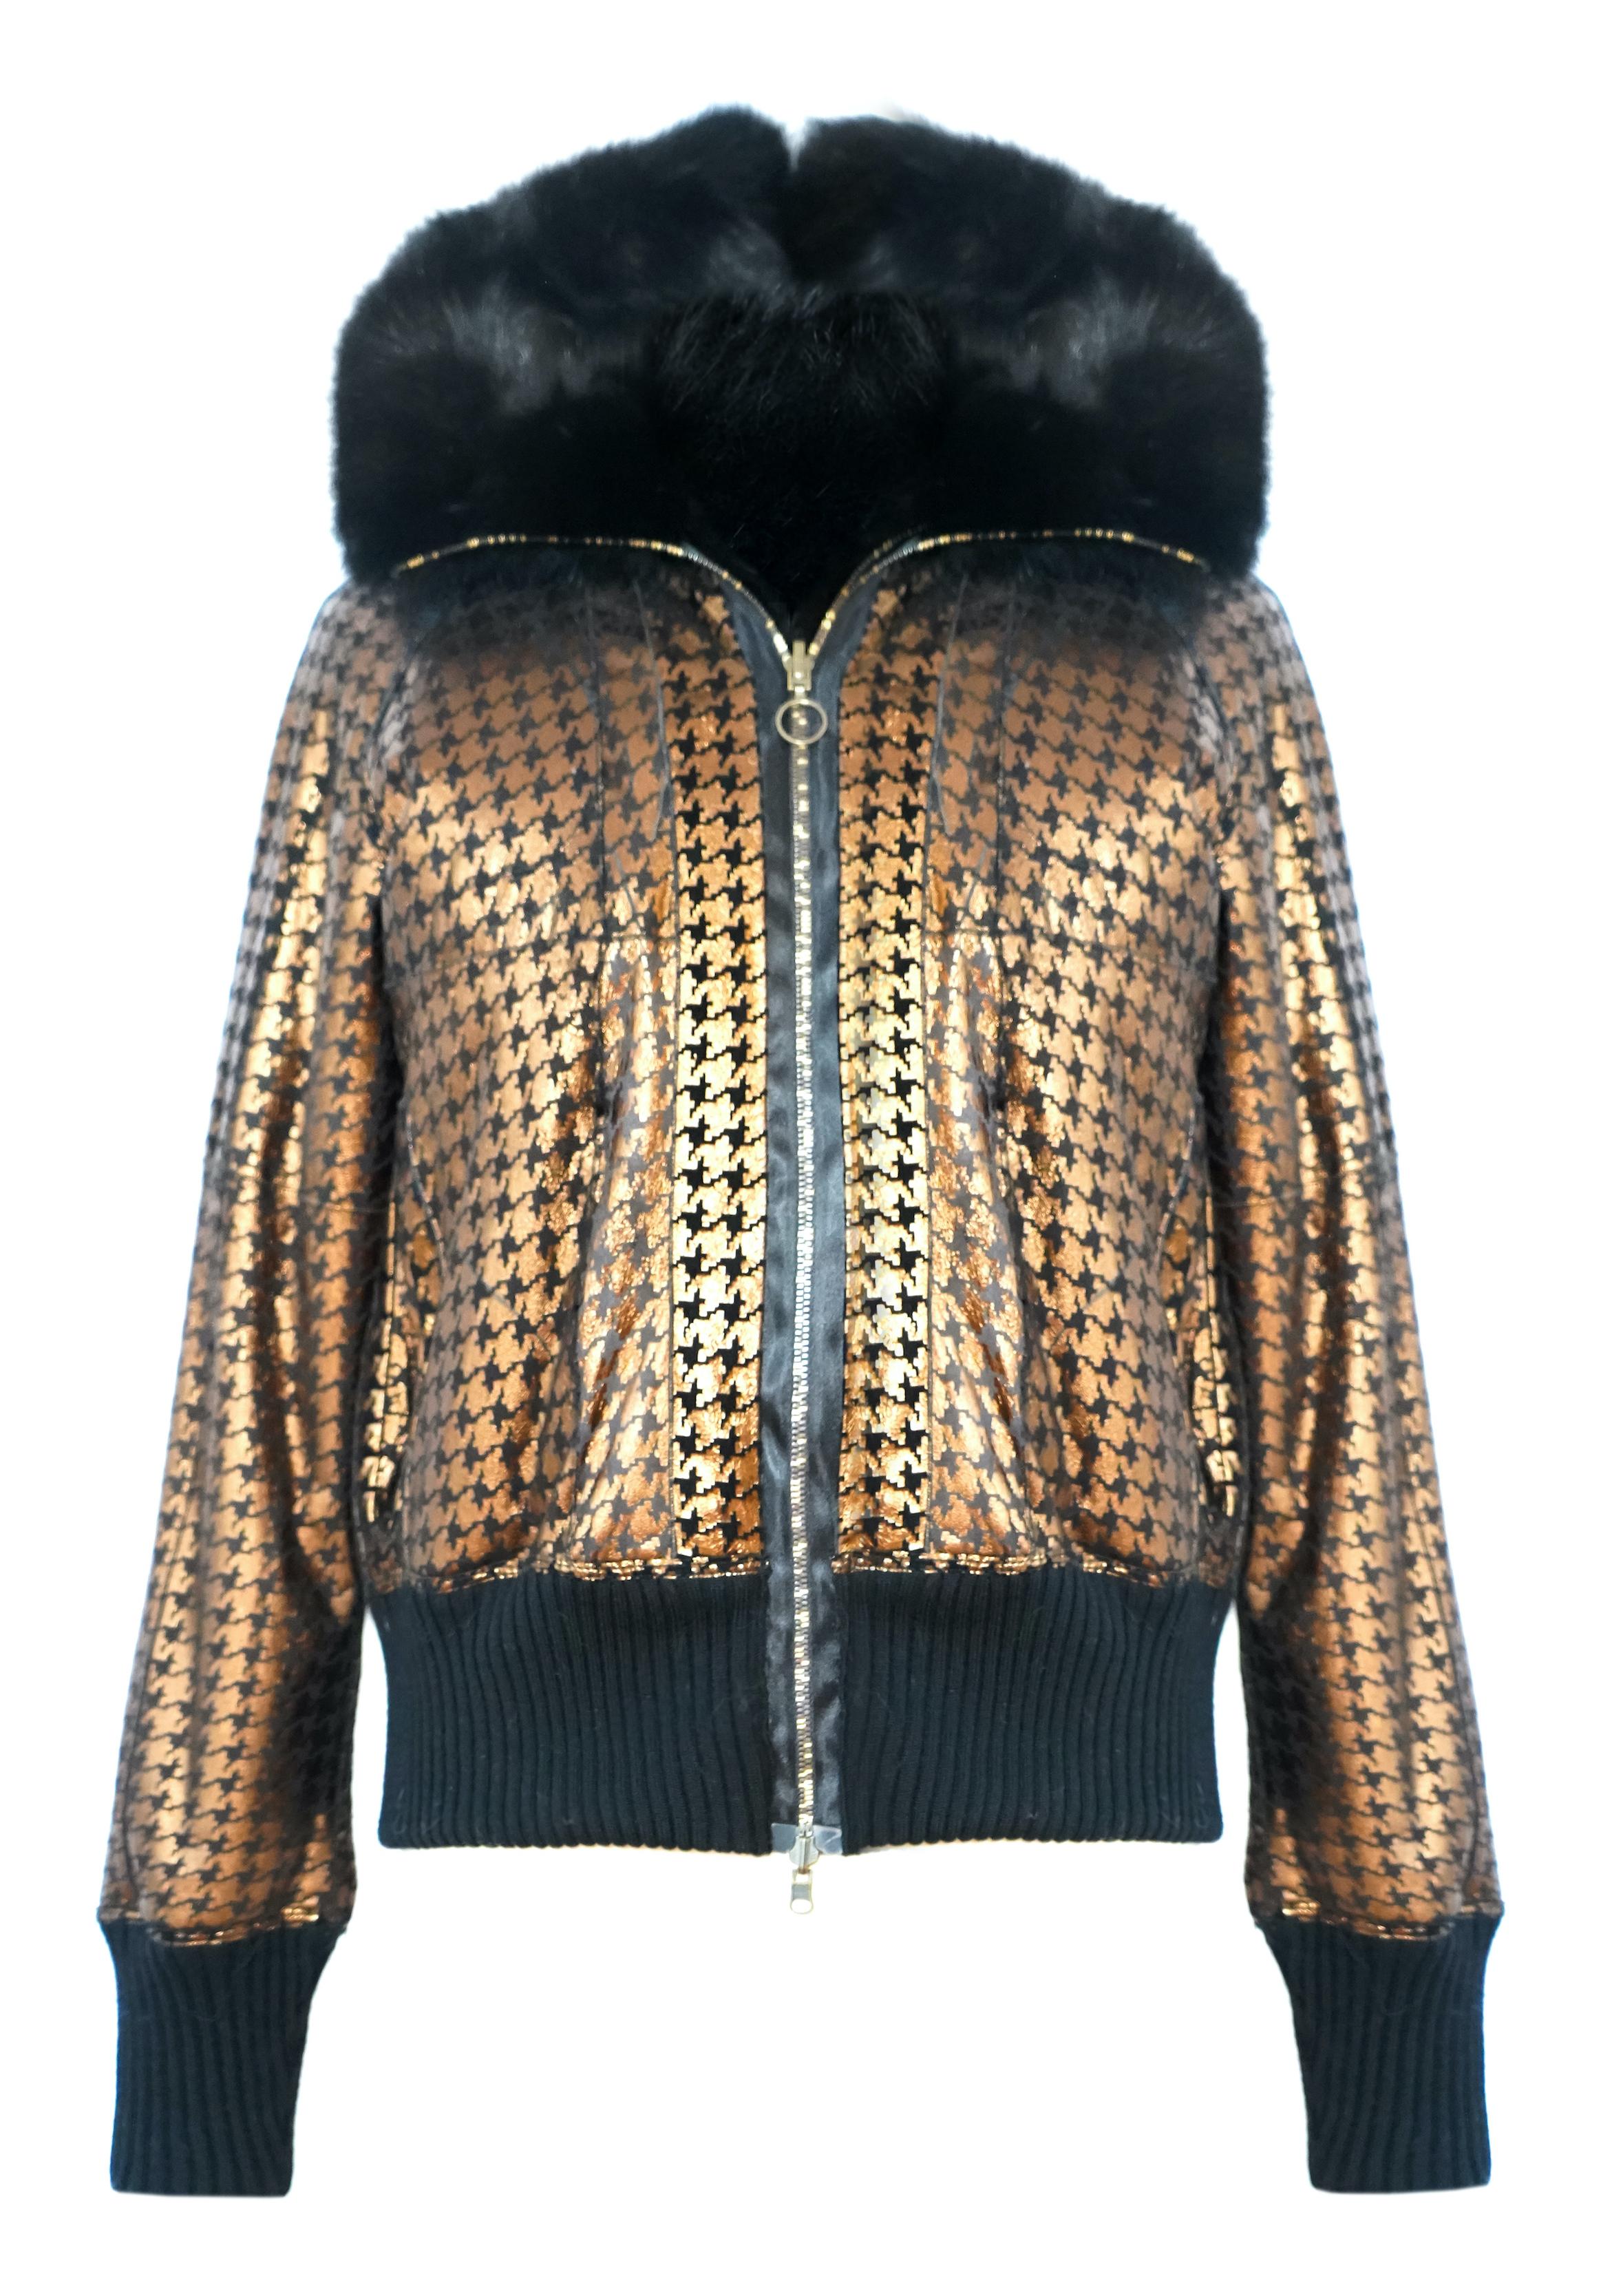 Helen Yarmak Barguzin Sable Jacket In New Condition For Sale In New York, NY